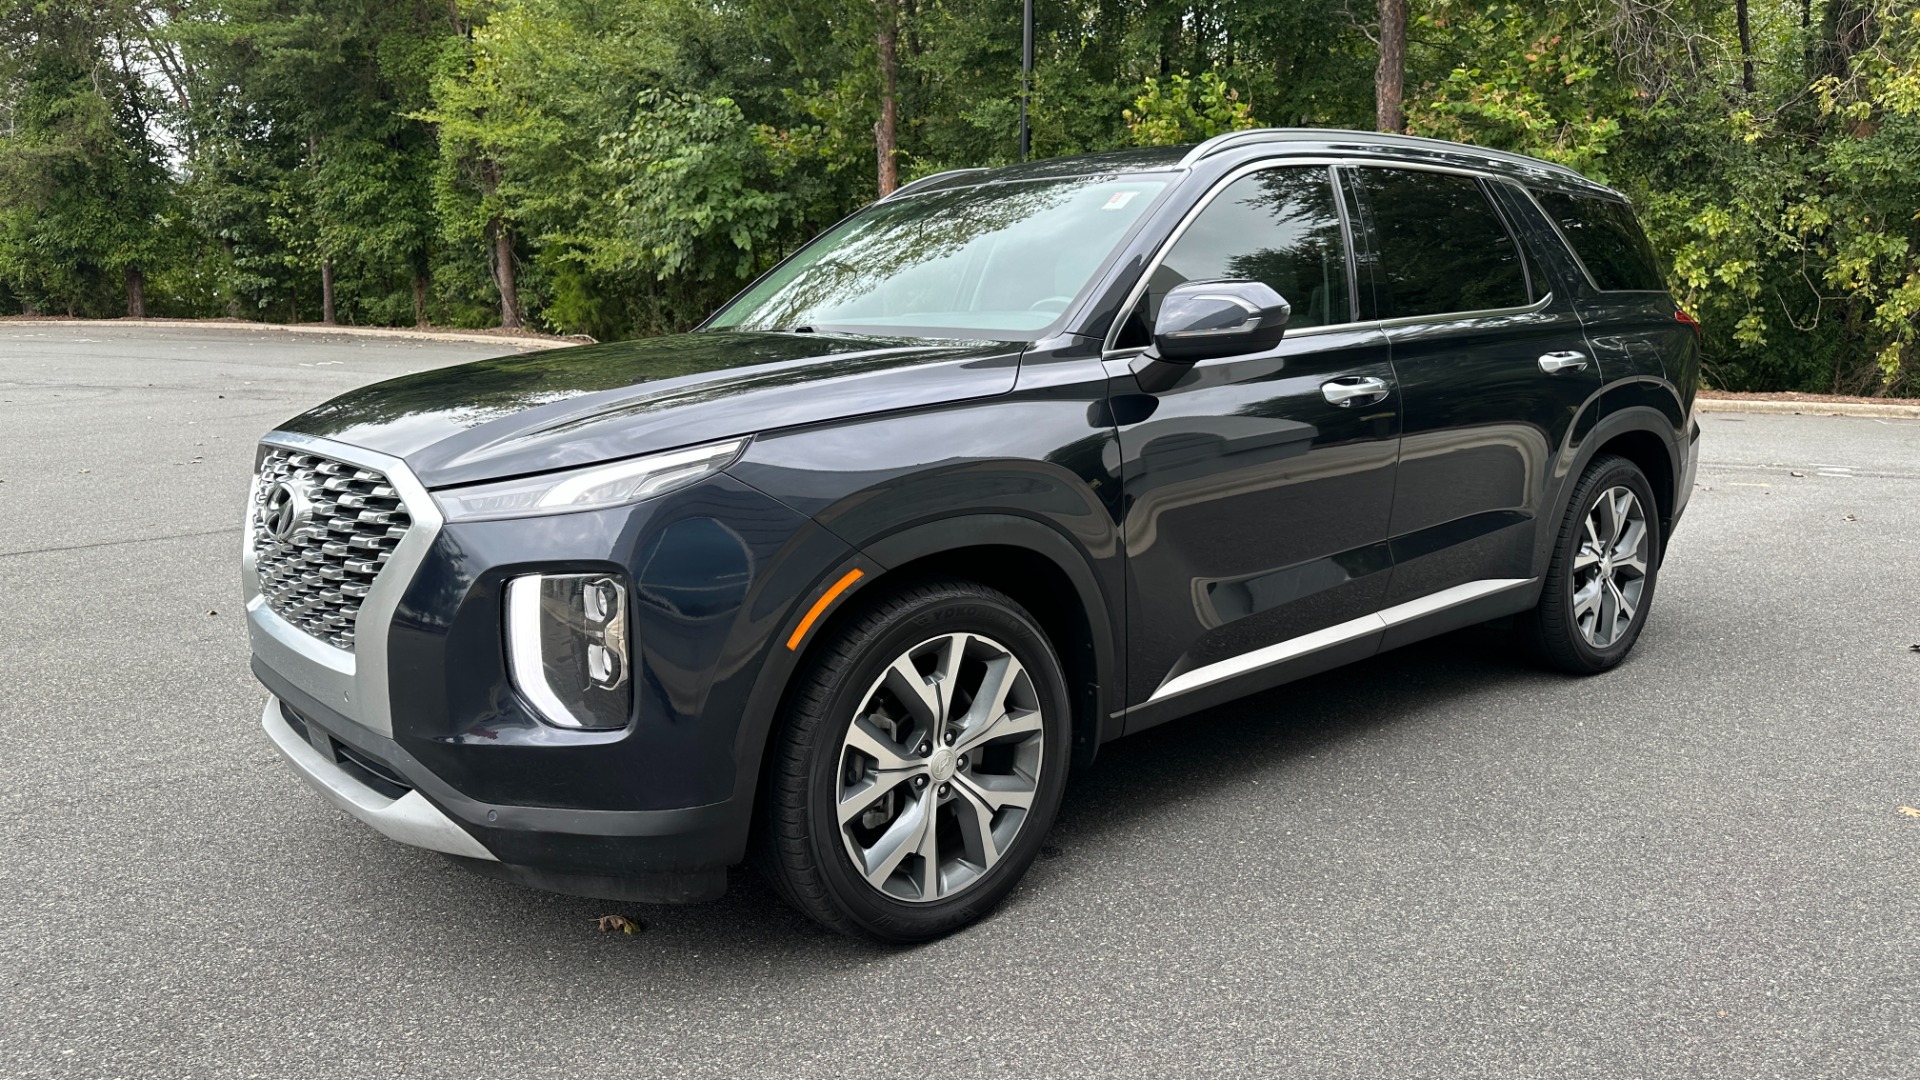 Used 2020 Hyundai Palisade SEL / CONVENIENCE / PREMIUM / SUNROOF / DRIVE GUIDANCE for sale $30,995 at Formula Imports in Charlotte NC 28227 5